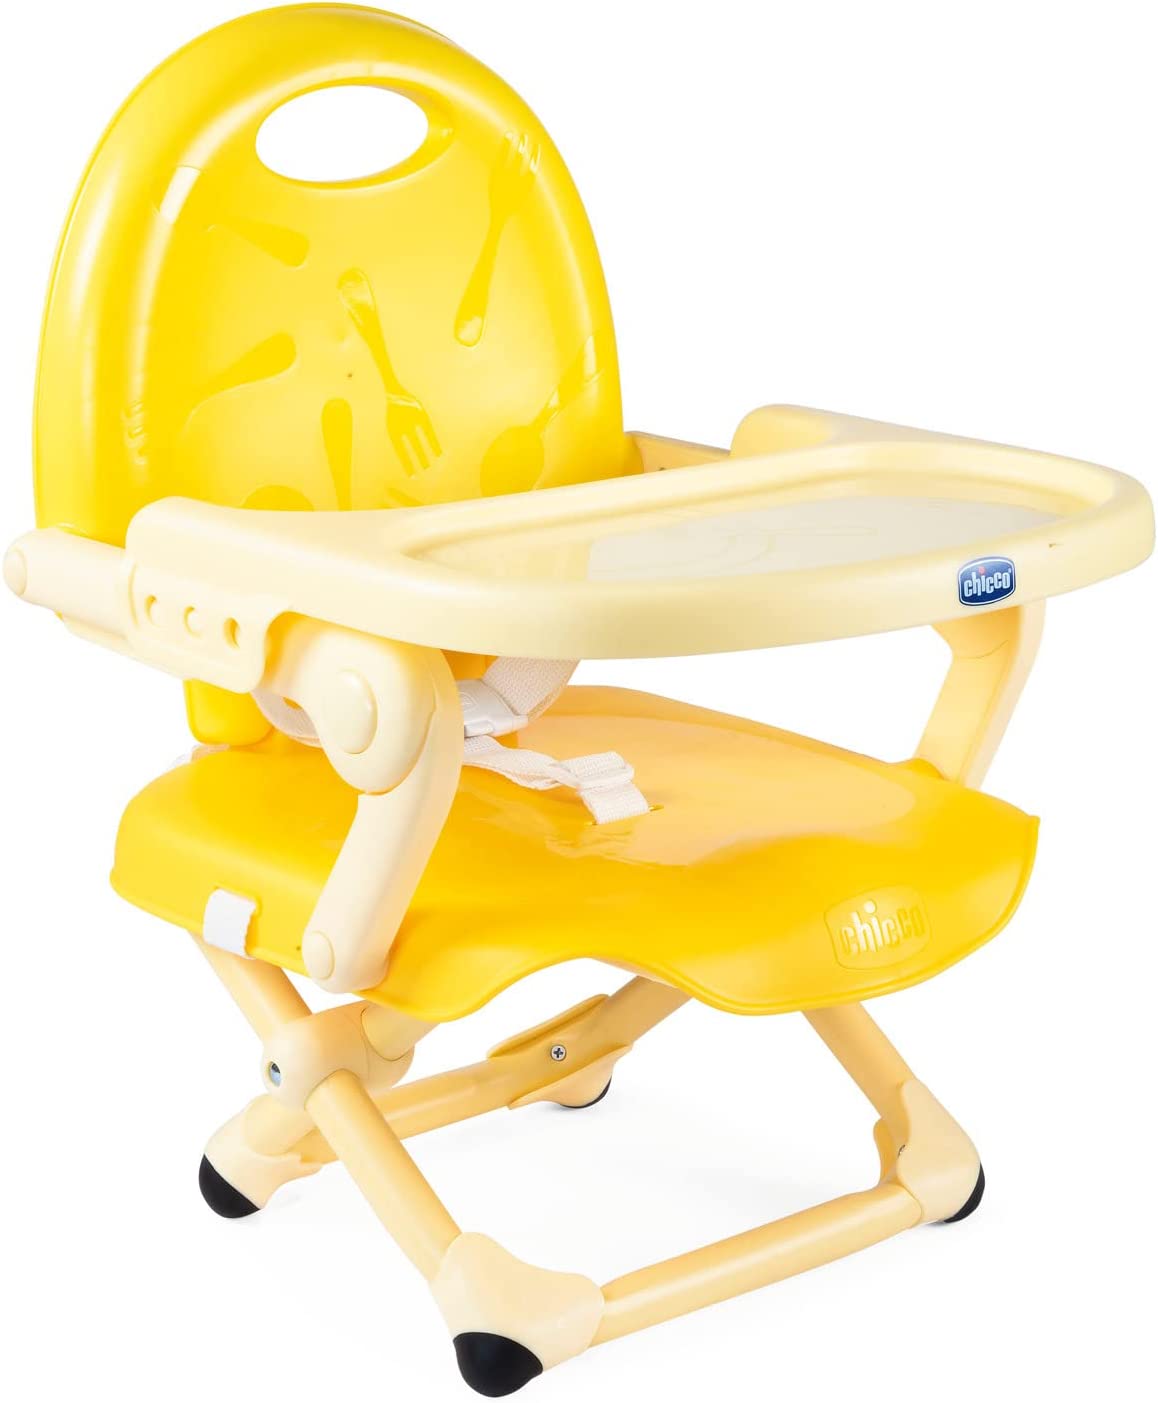 Chicco Pocket Snack Booster Seat, 6- 36 Months, Saffron